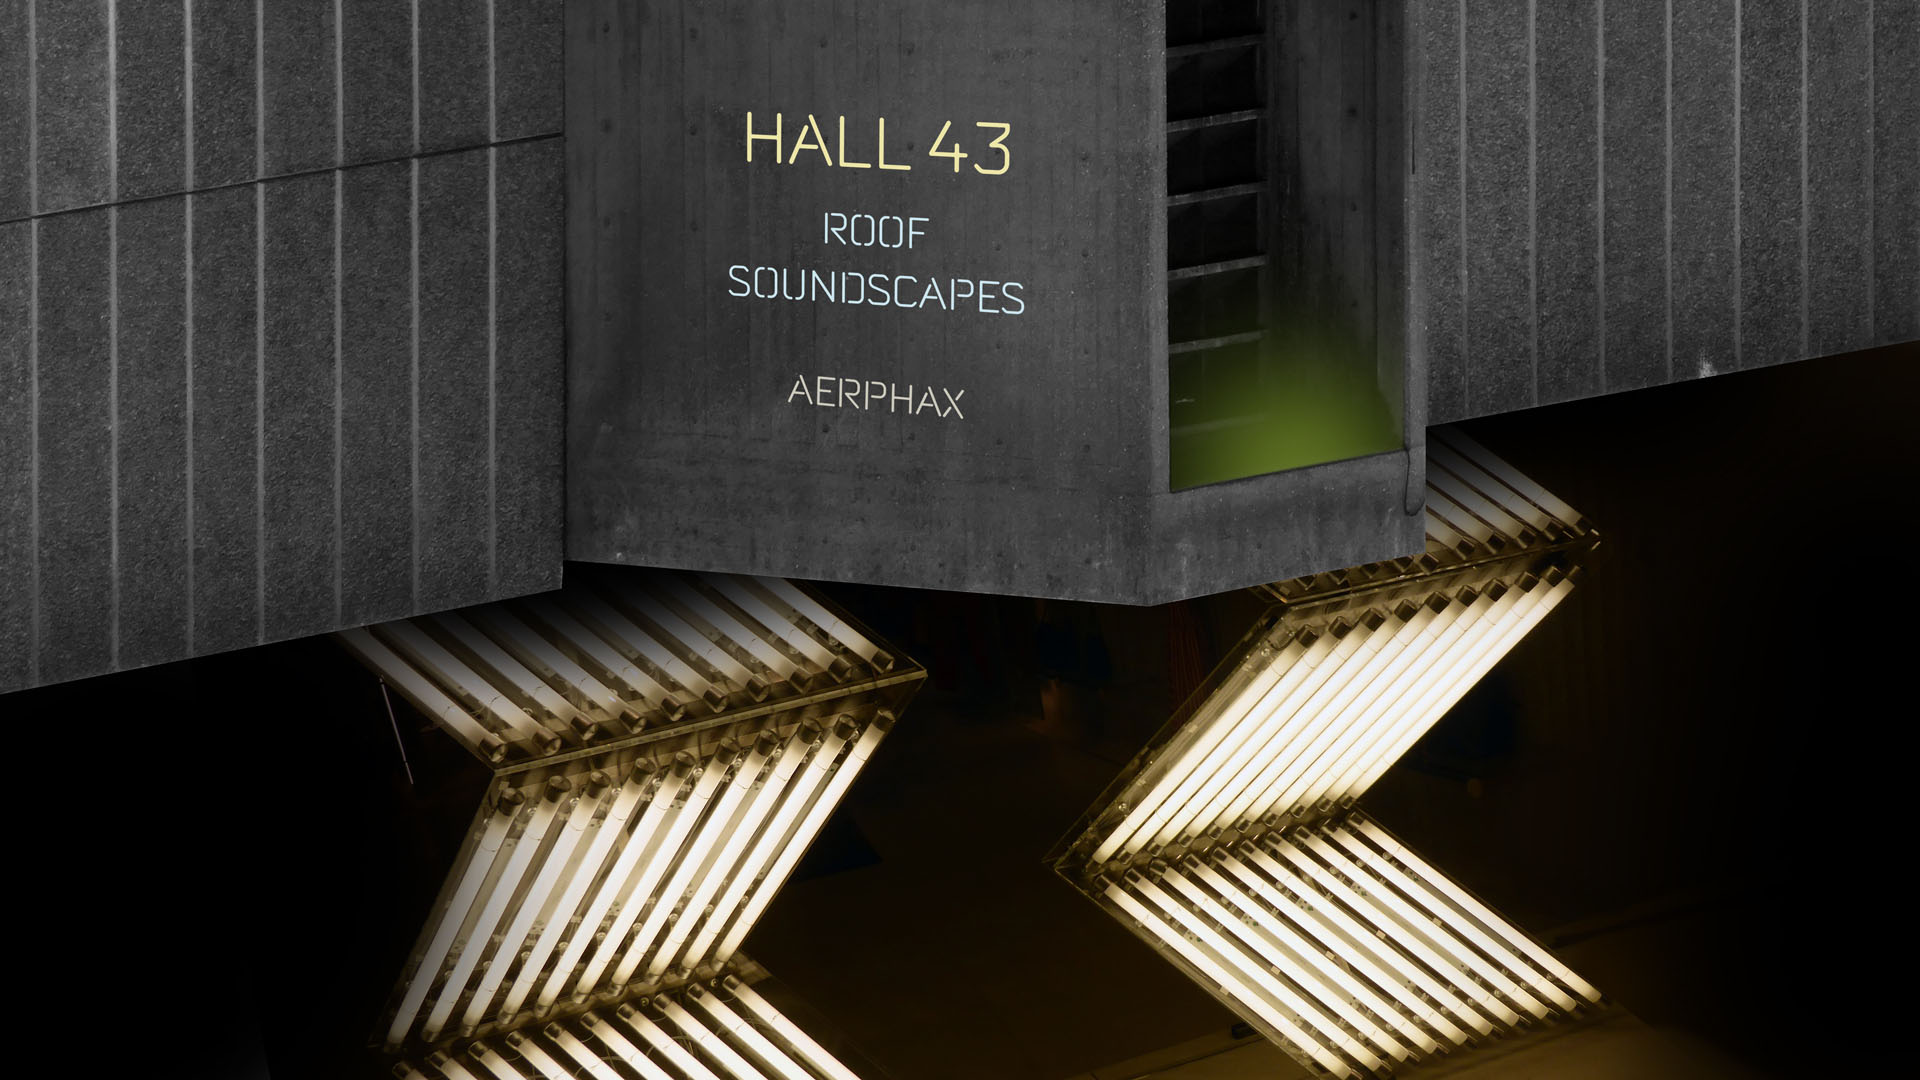 Hall-43-Roof-Soundscapes-COVER-ART-DESIGN-electronic_music_techno_electro_idm_ambient